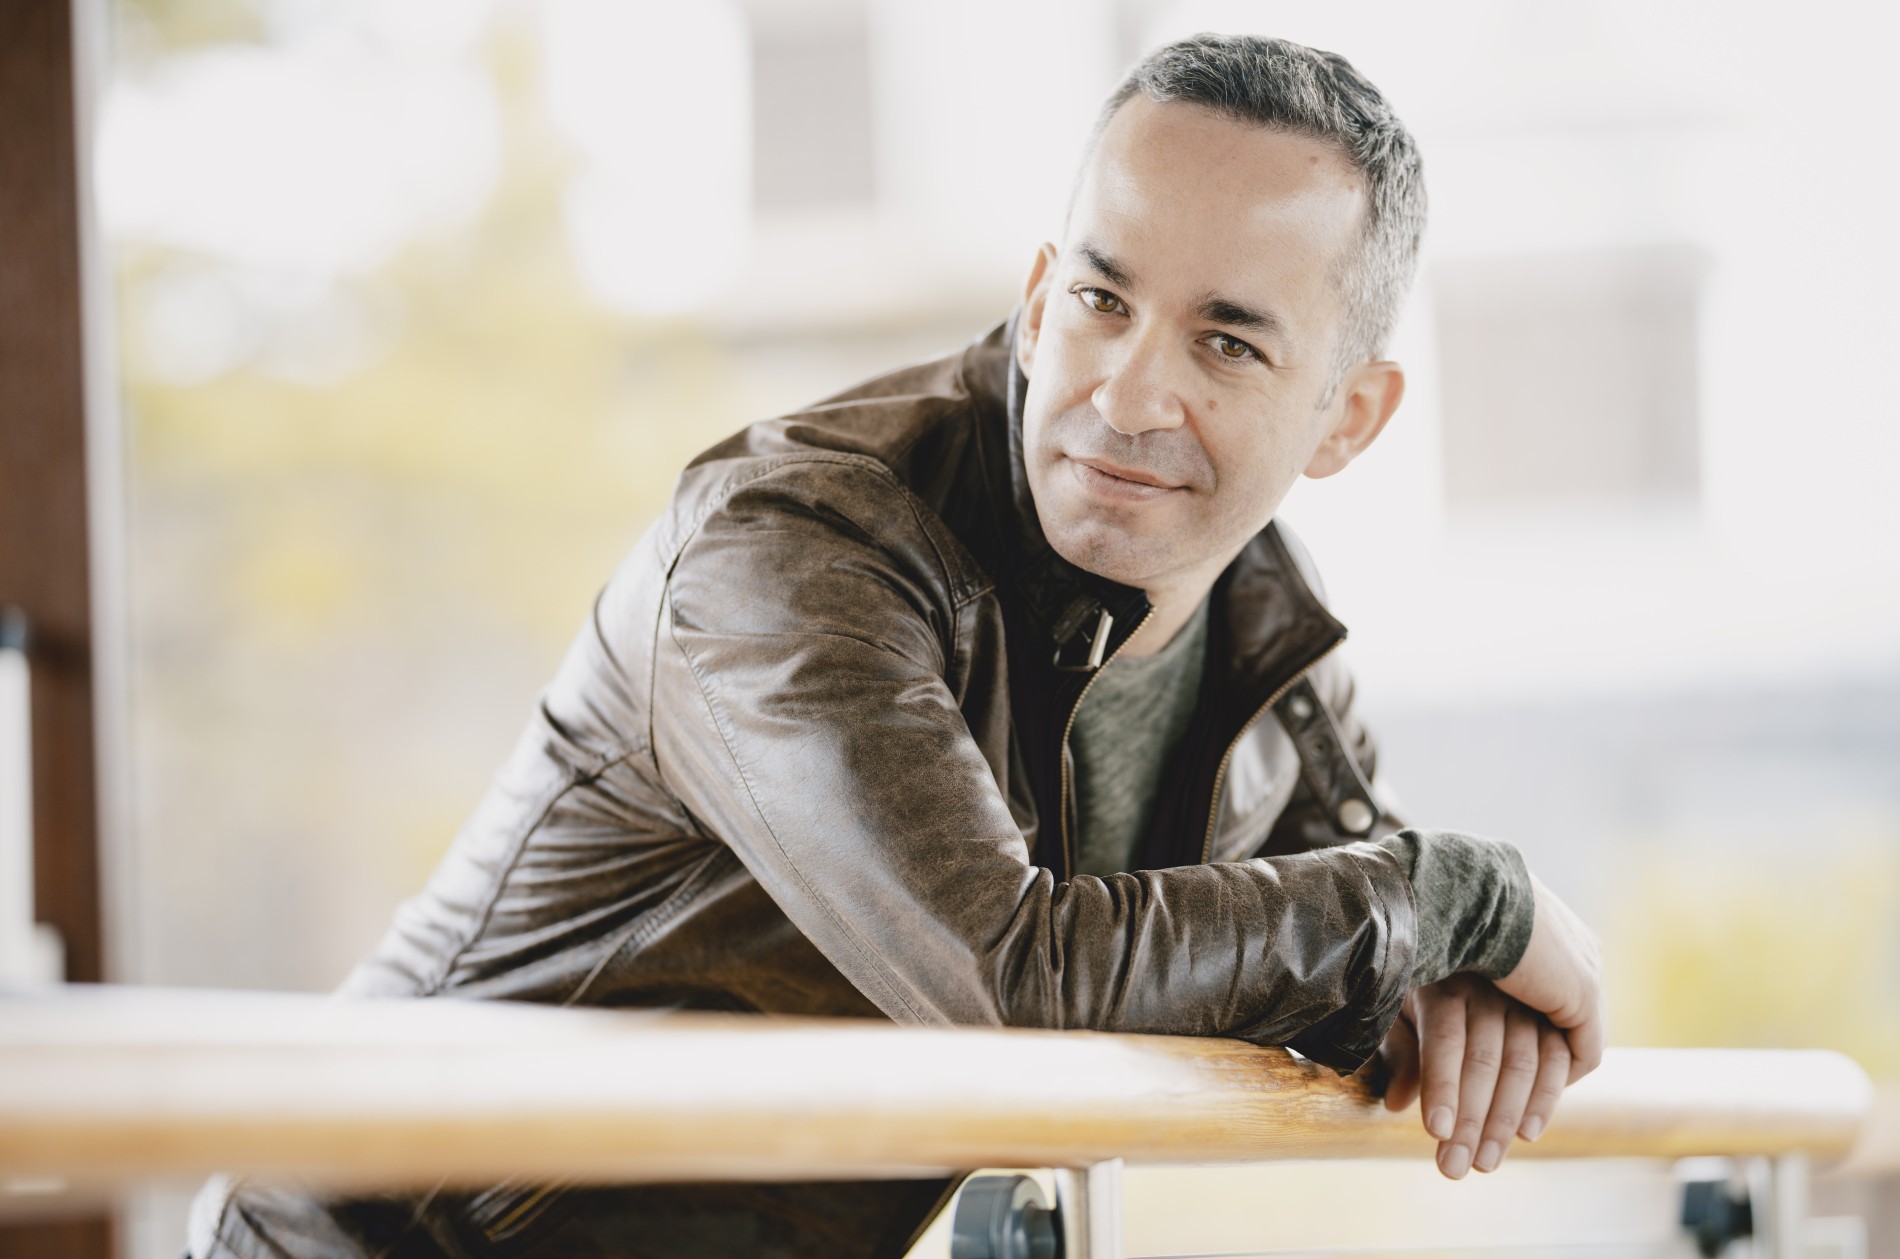 Pianist Inon Barnatan, wearing a leather jacket, leans over an outdoor railing